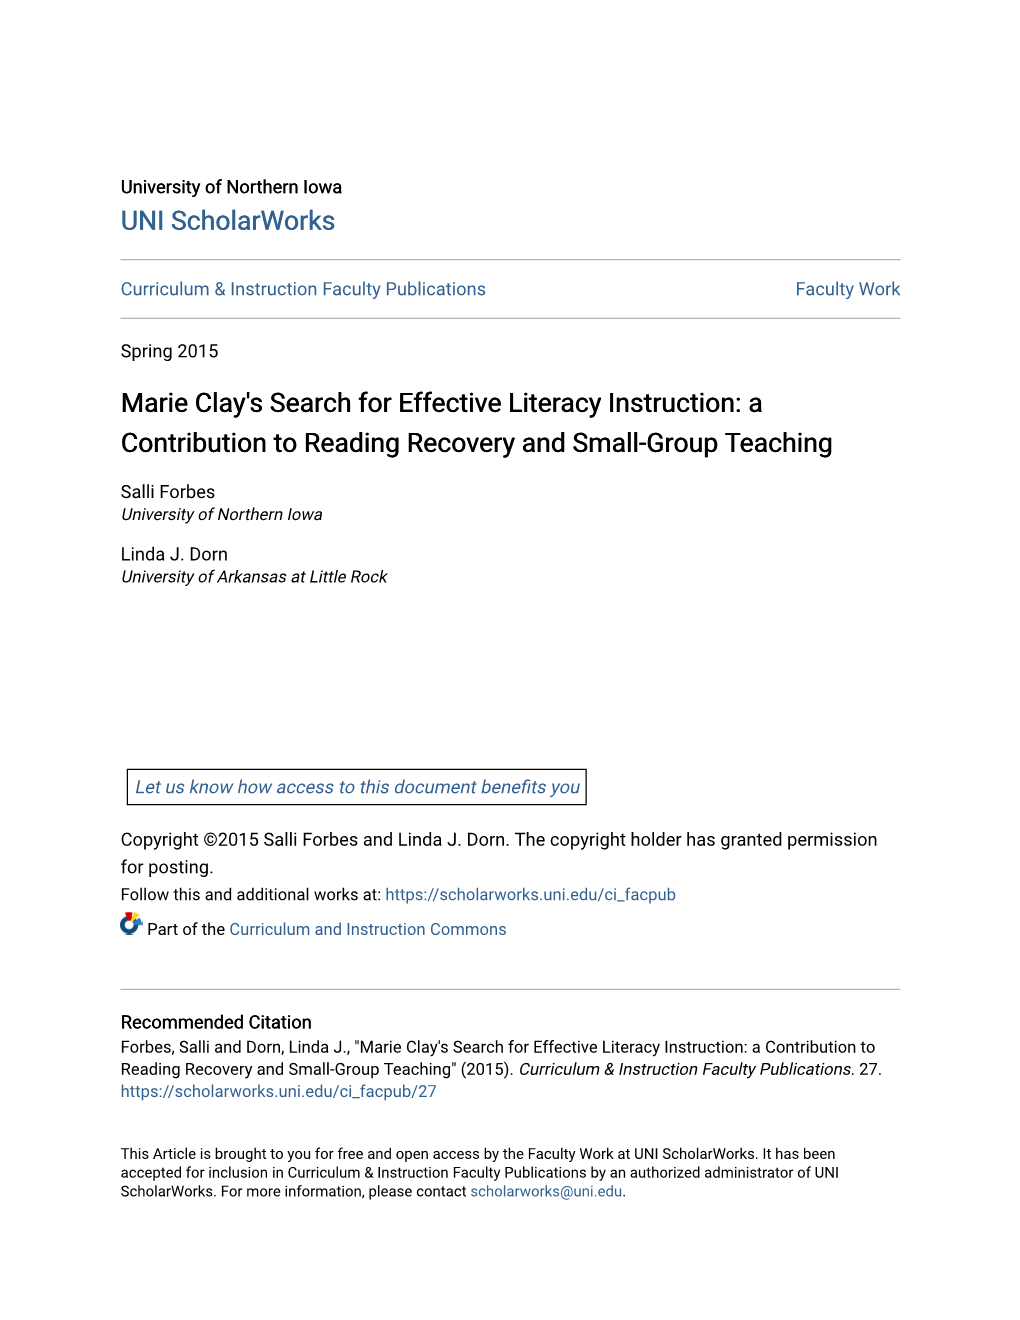 Marie Clay's Search for Effective Literacy Instruction: a Contribution to Reading Recovery and Small-Group Teaching